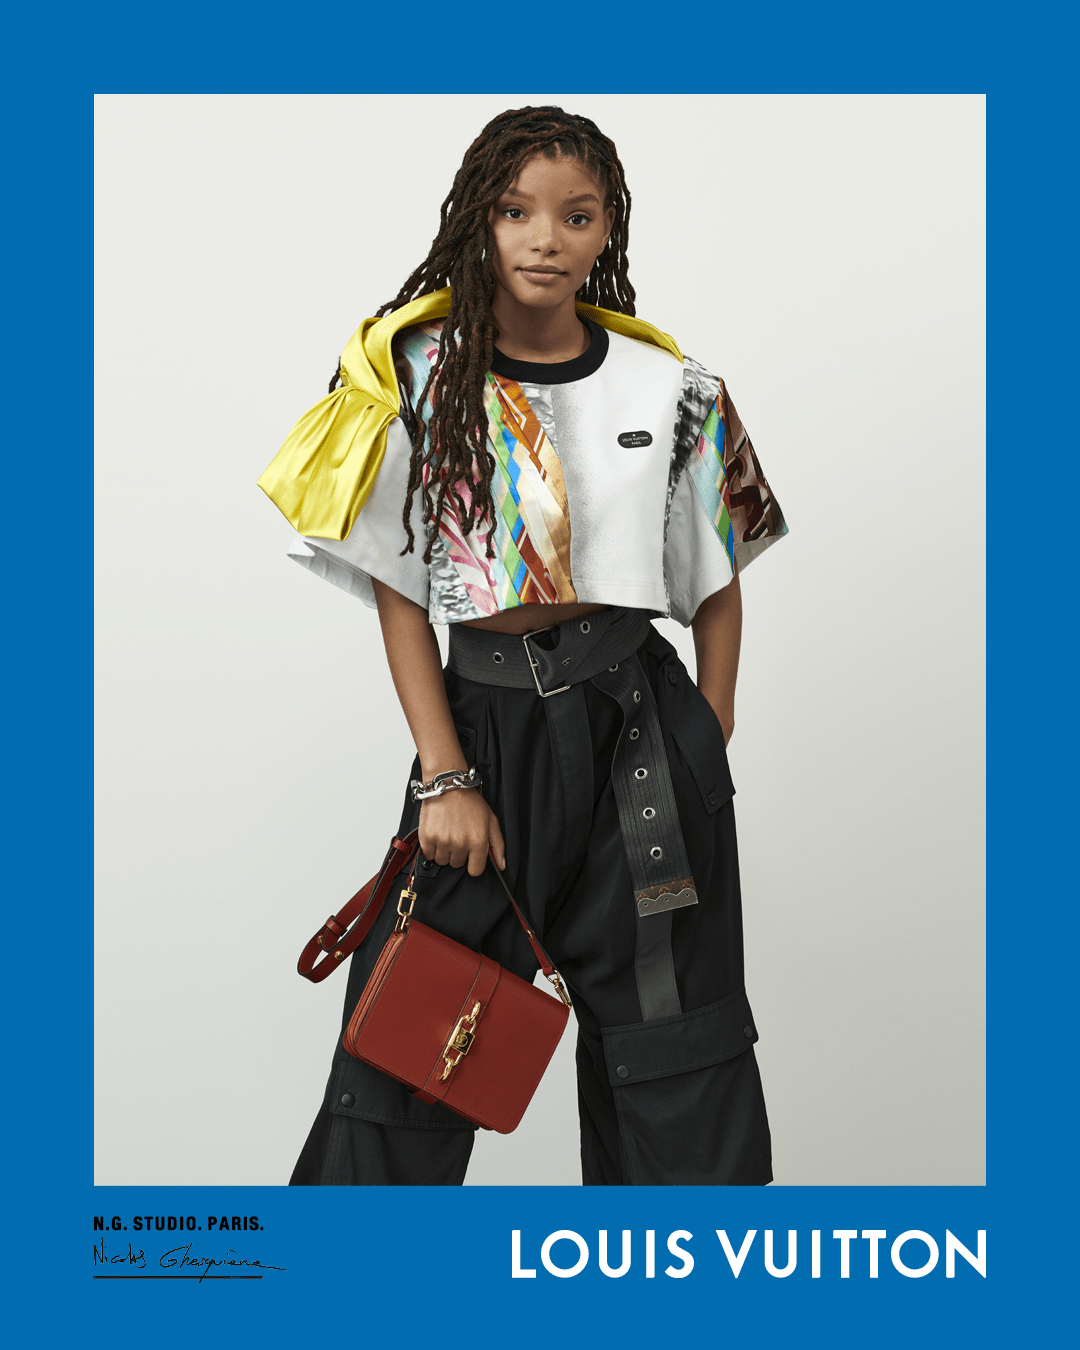 Louis Vuitton Spring 2021 Ad Campaign Featuring An All-Star Cast | LES